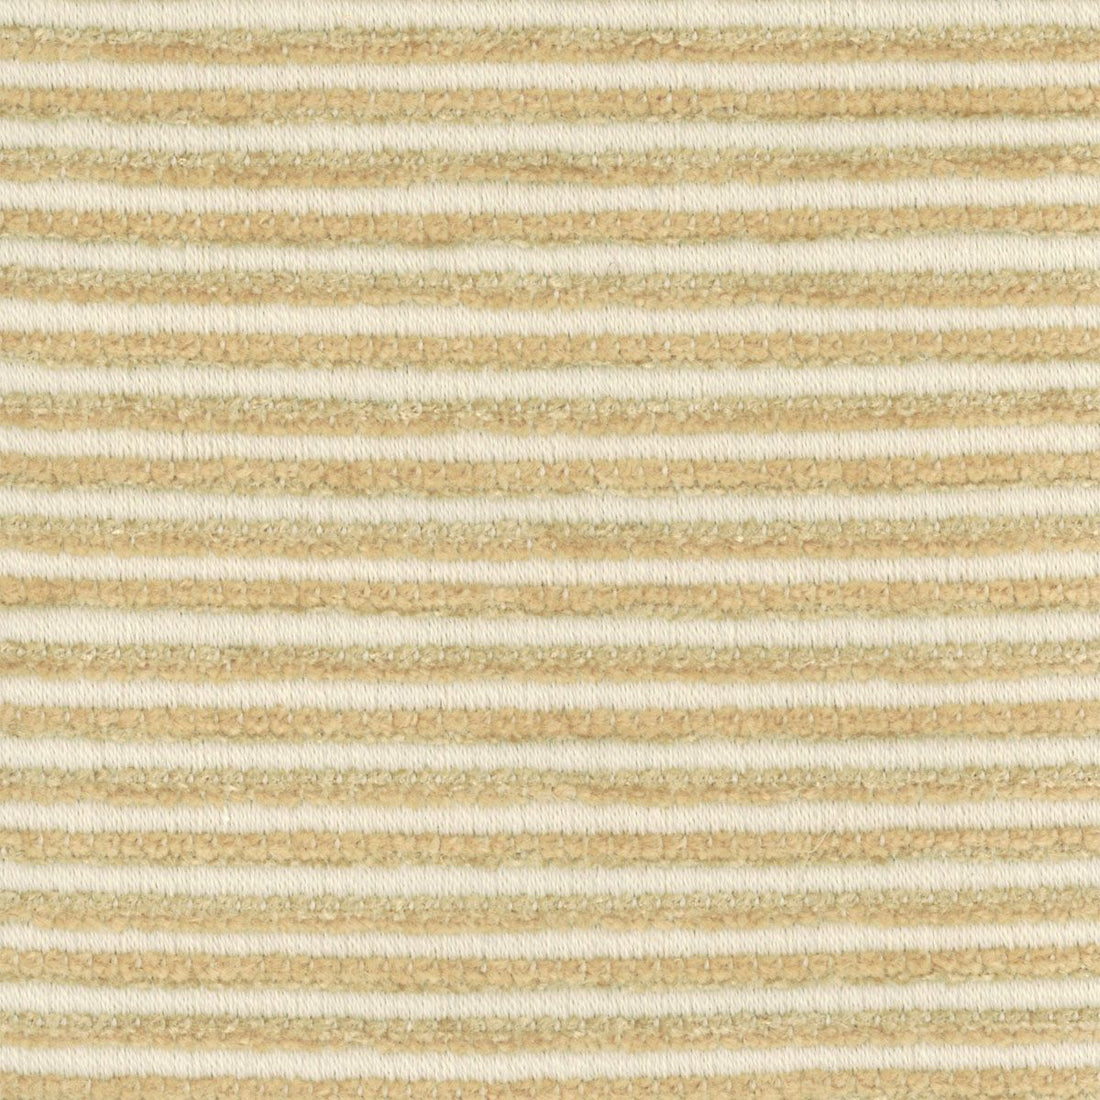 Cimmeria fabric in desert color - pattern number WC 0005U32A - by Scalamandre in the Old World Weavers collection